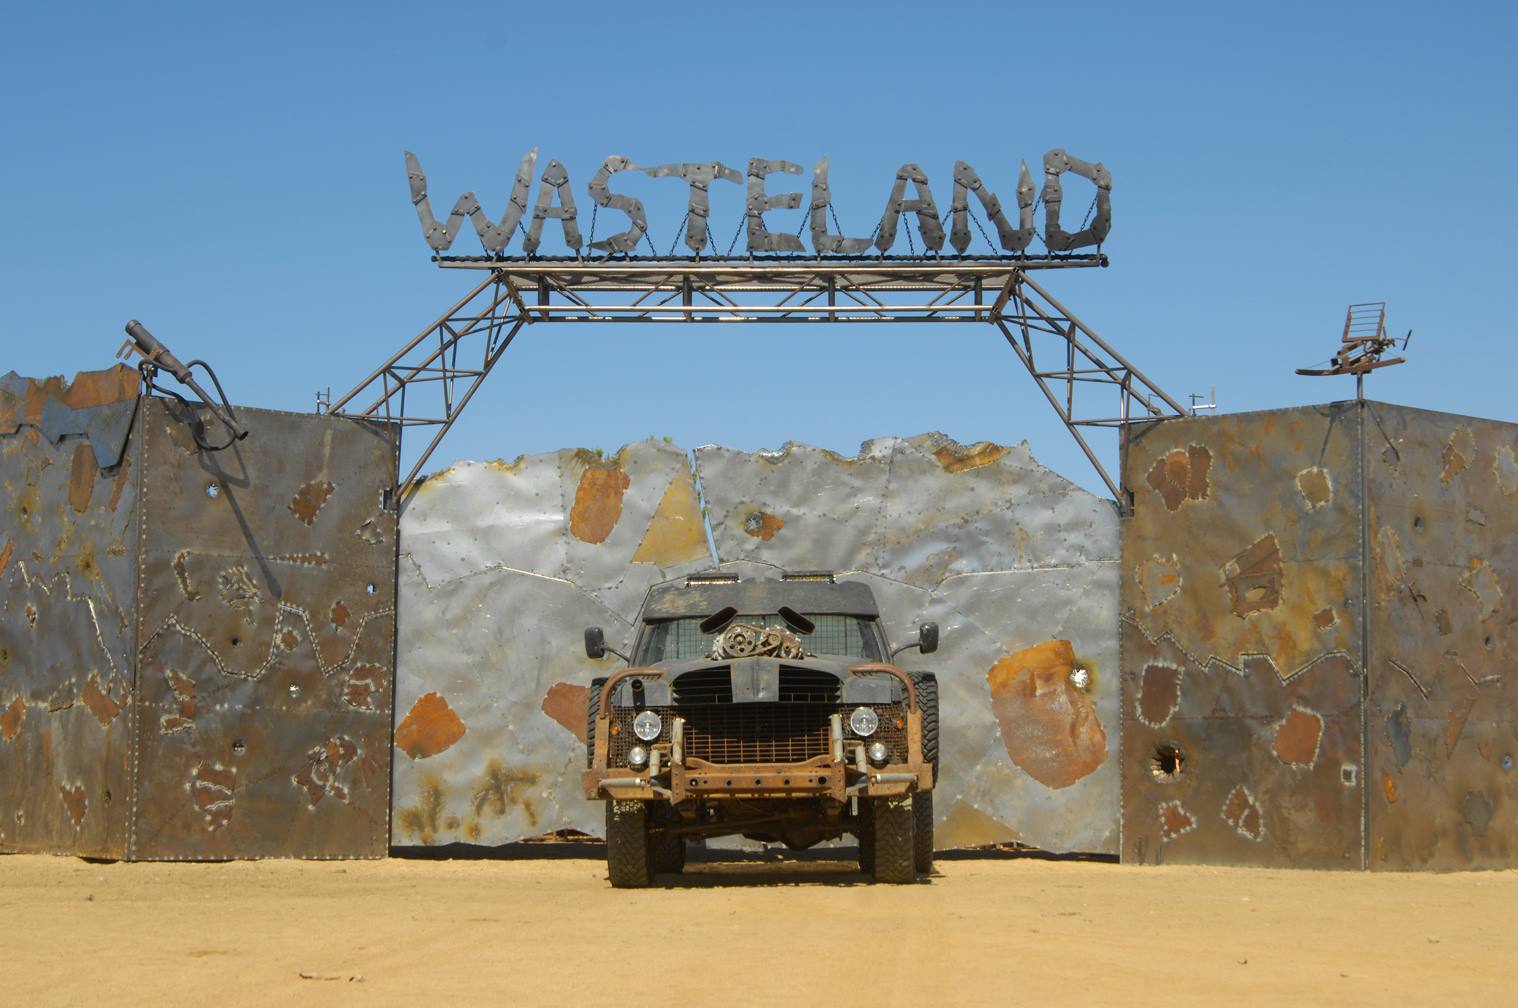 The story of Wasteland Weekend